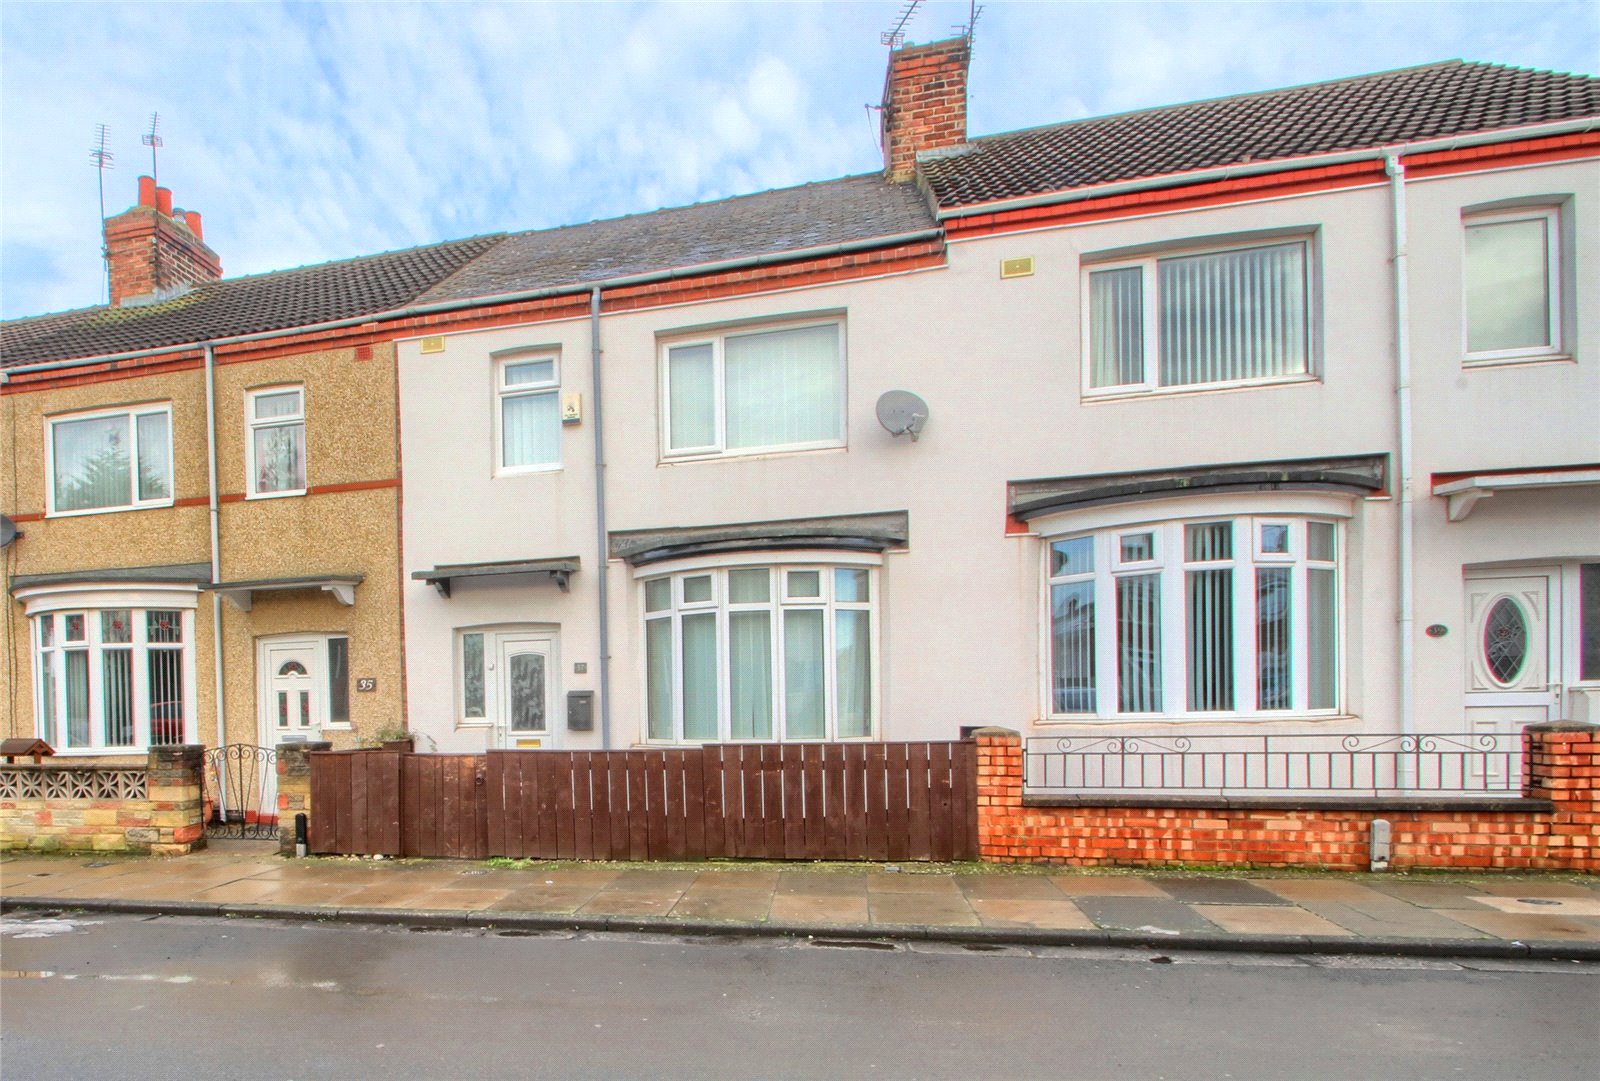 3 bed house for sale in Richardson Road, Stockton-on-Tees 1